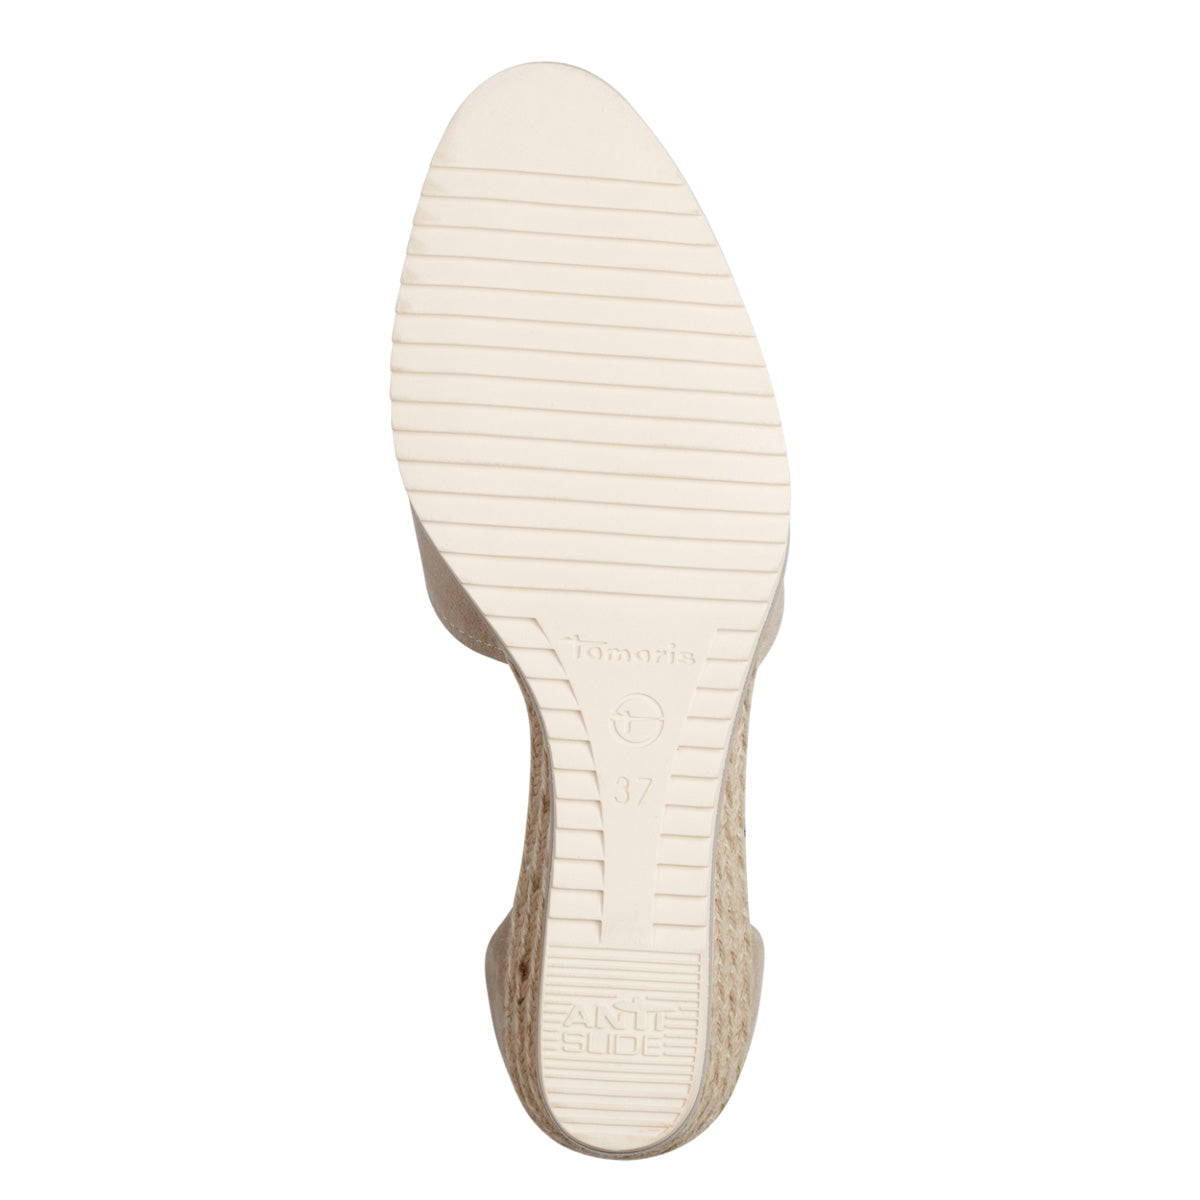 Bottom view showing the espadrille rope sole.